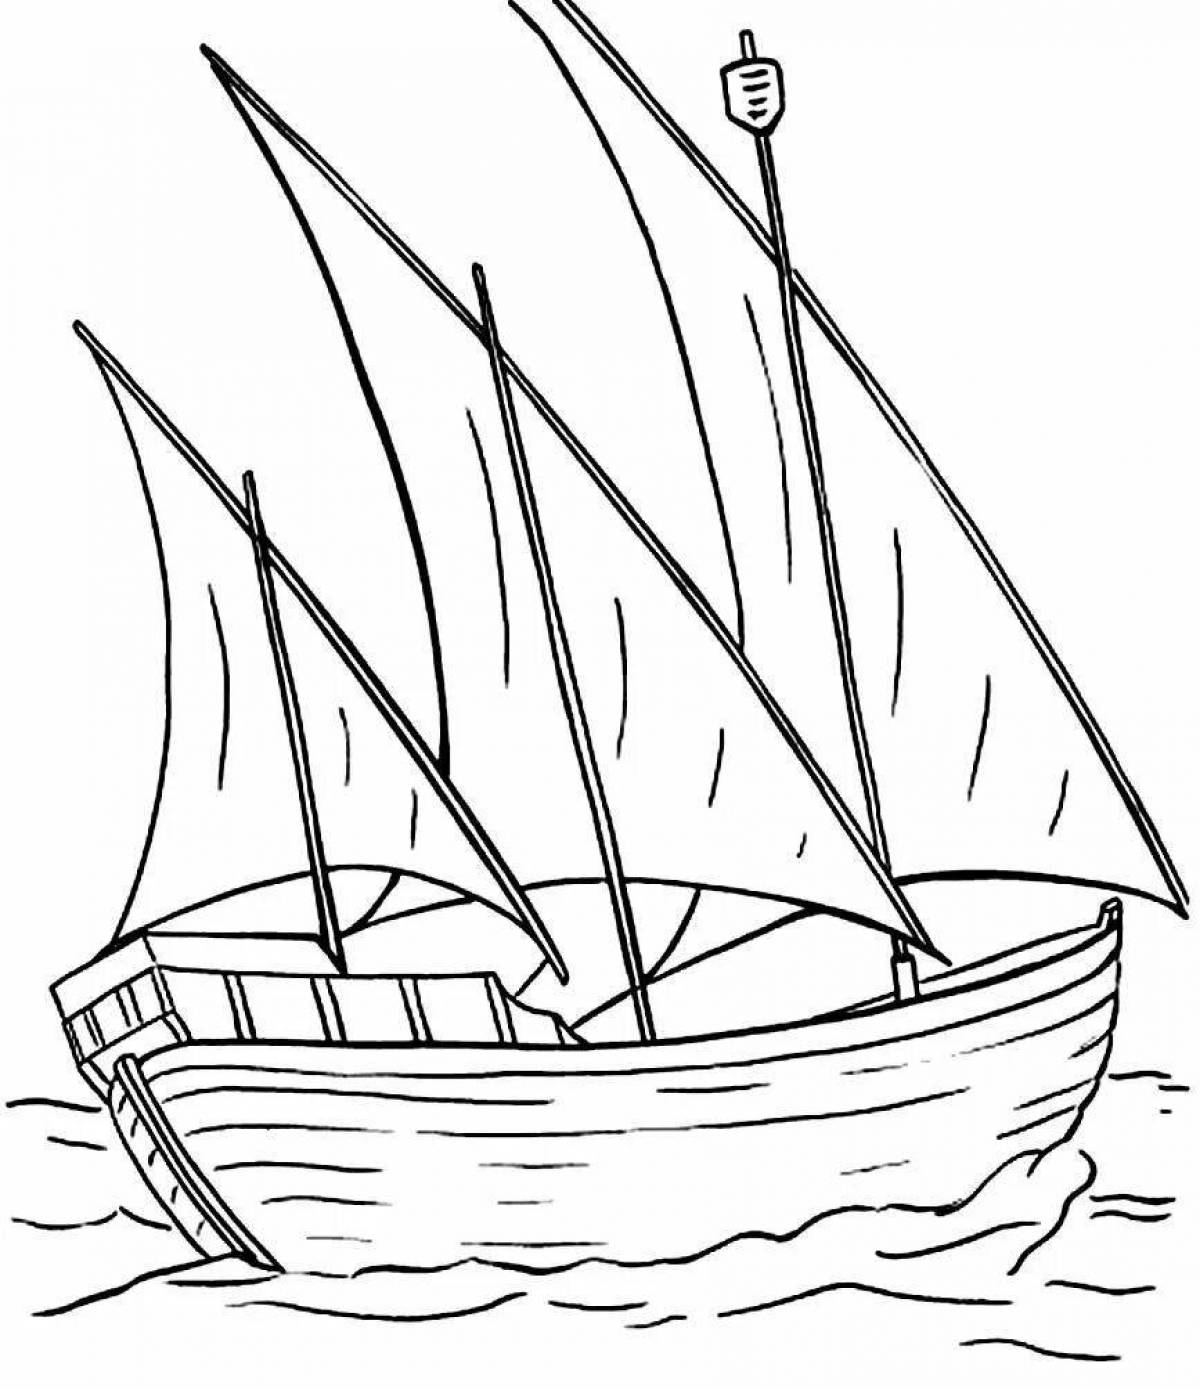 Coloring page dazzling boat